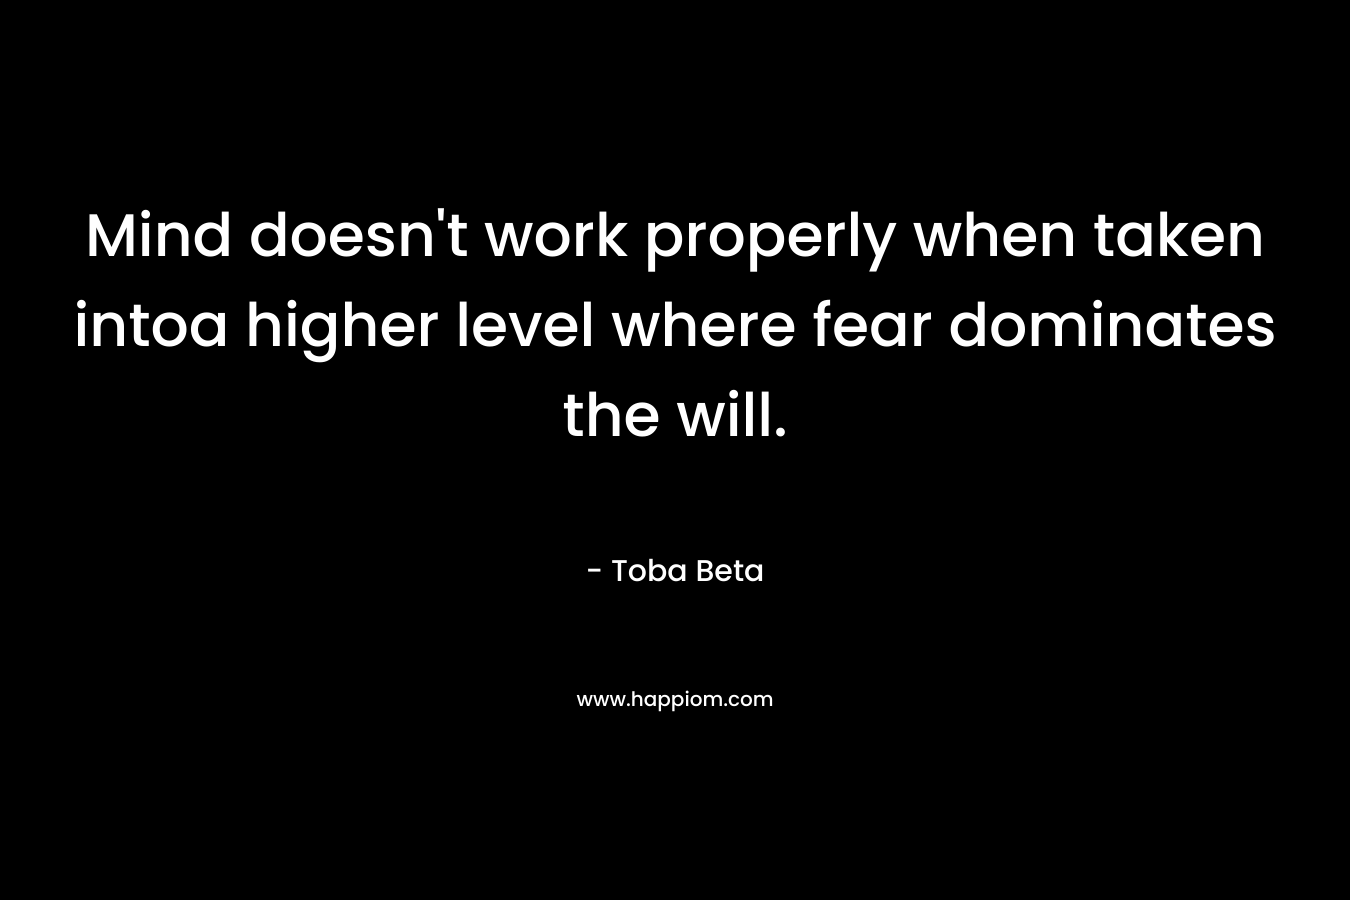 Mind doesn't work properly when taken intoa higher level where fear dominates the will.